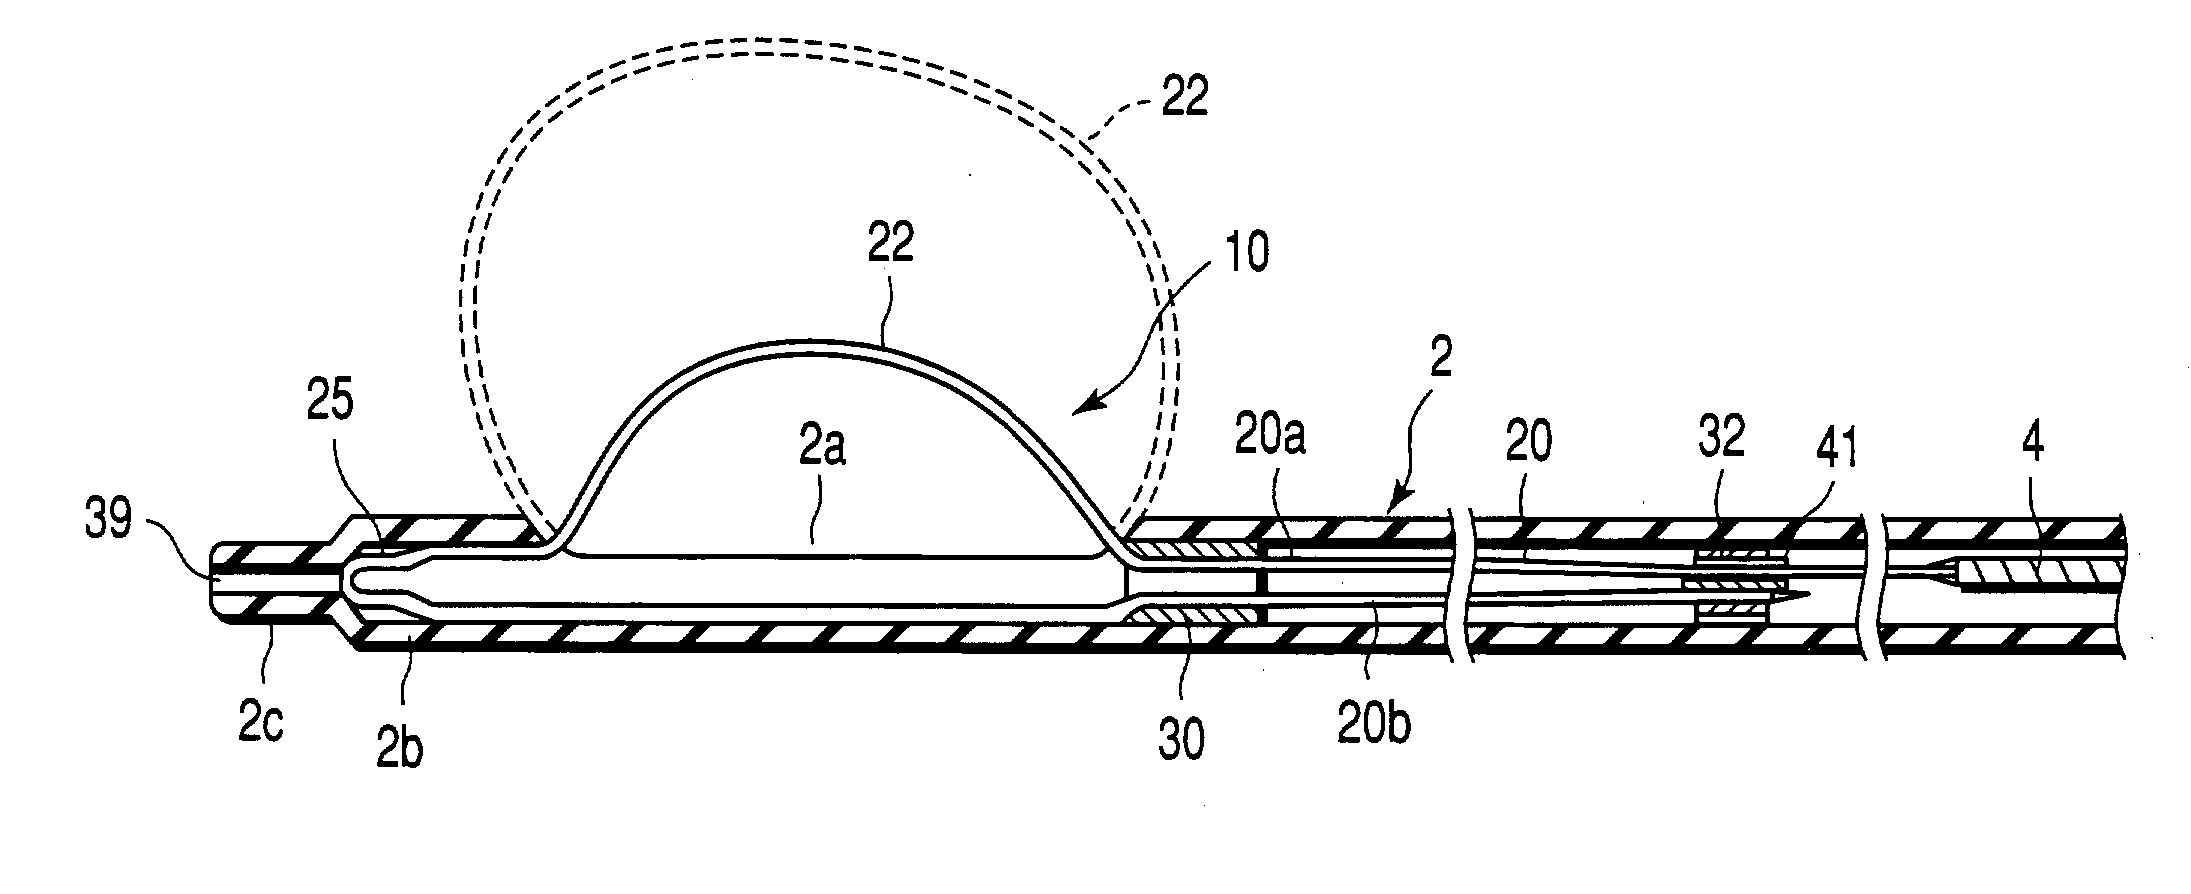 Surgical treatment device